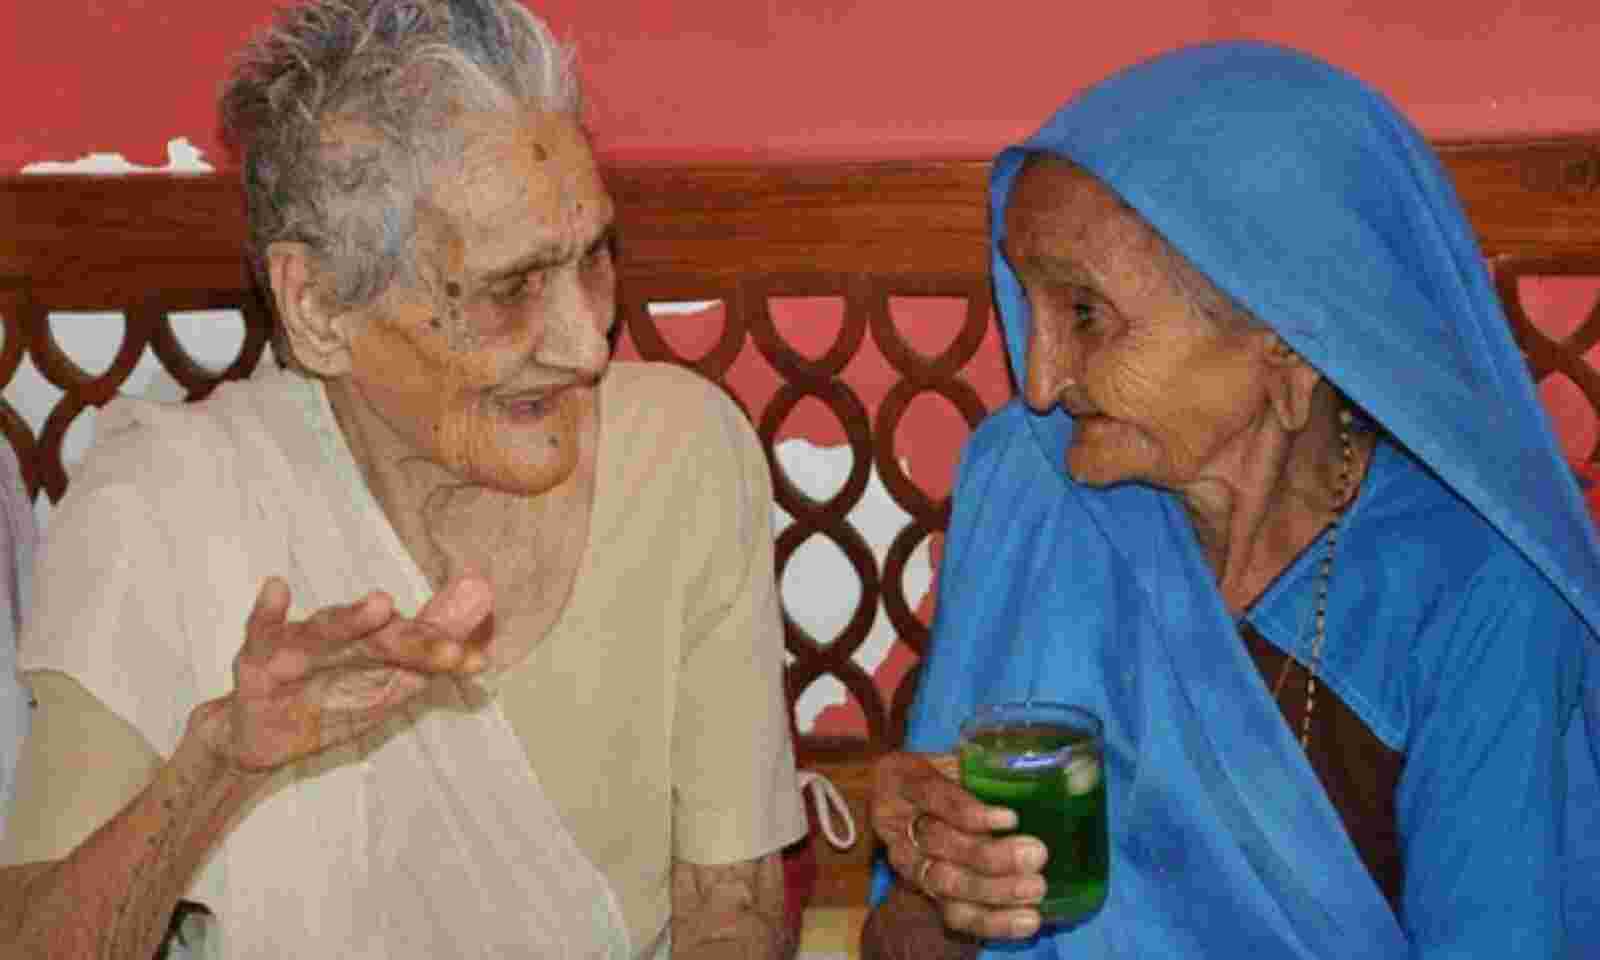 60+ Is India's Fastest Growing Demographic. Yet, Public Policy Largely  Ignores The Elderly